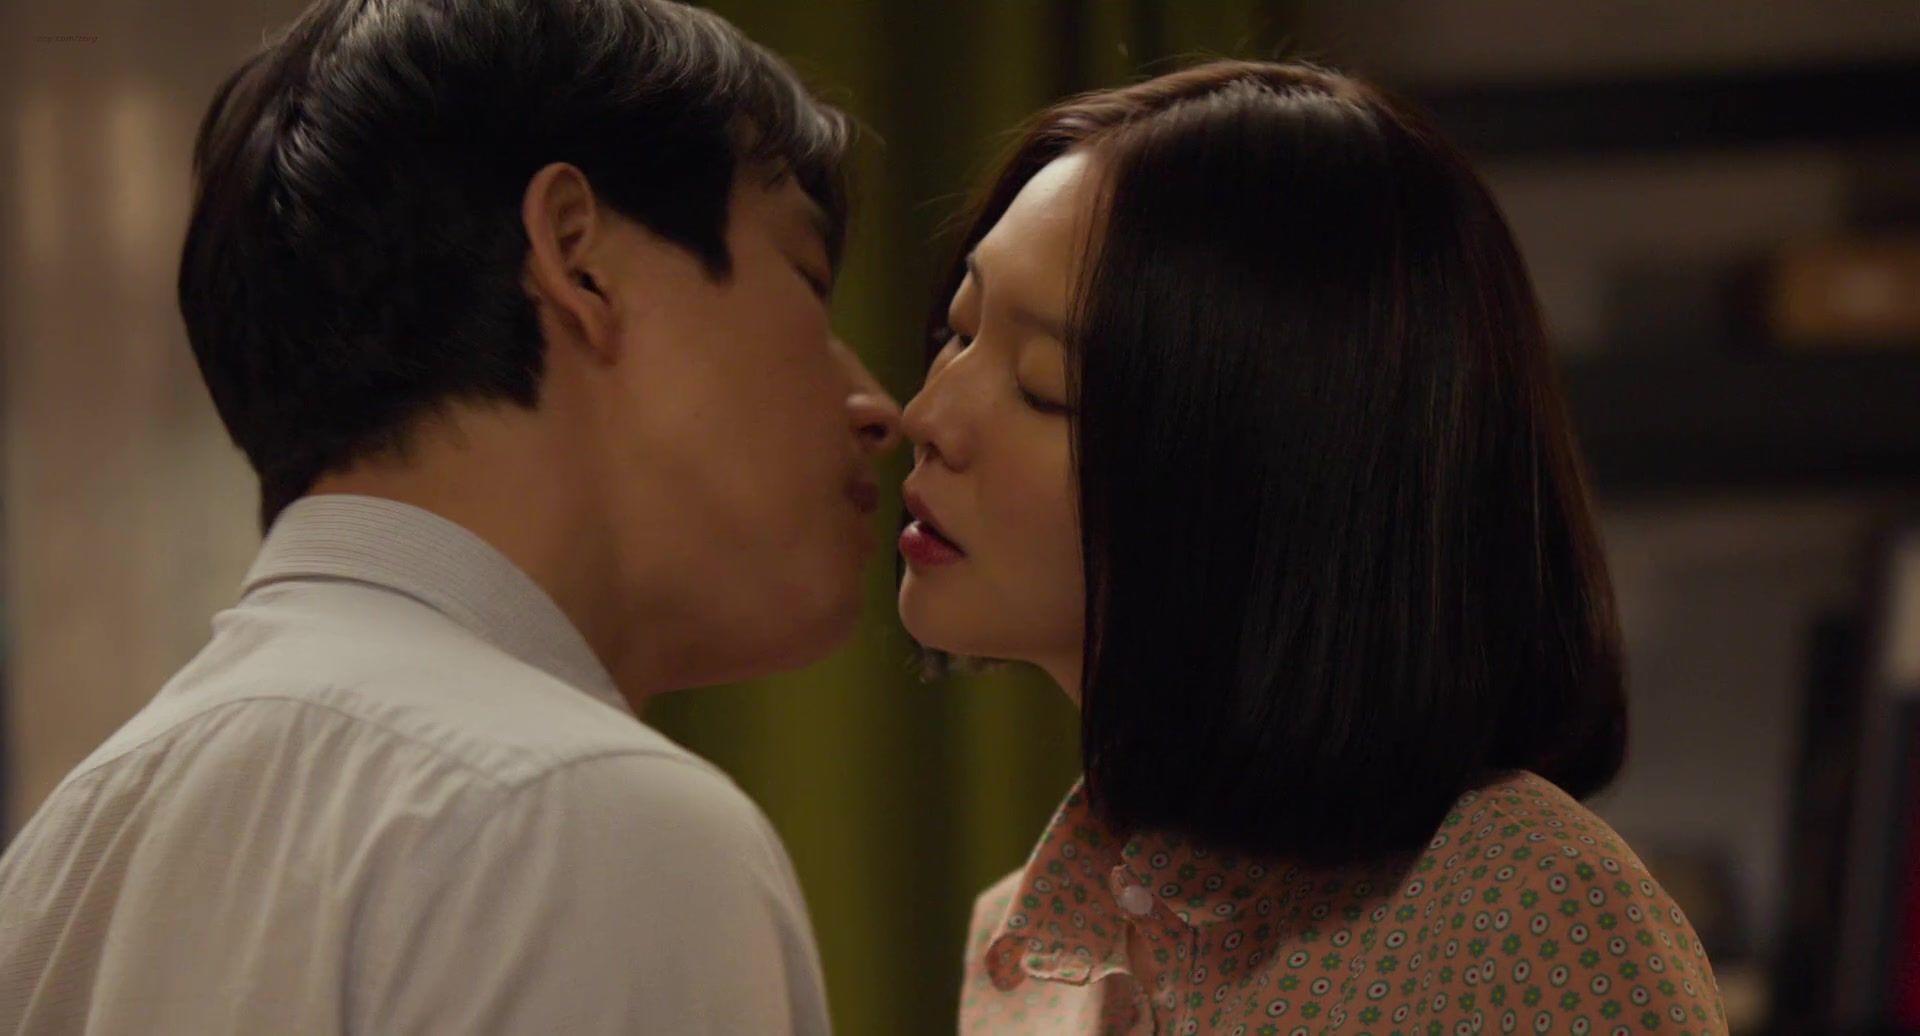 Swallowing Asian Celebs sex scenes | So-Young Park & Esom - Madam Ppang-Deok (2014) Party